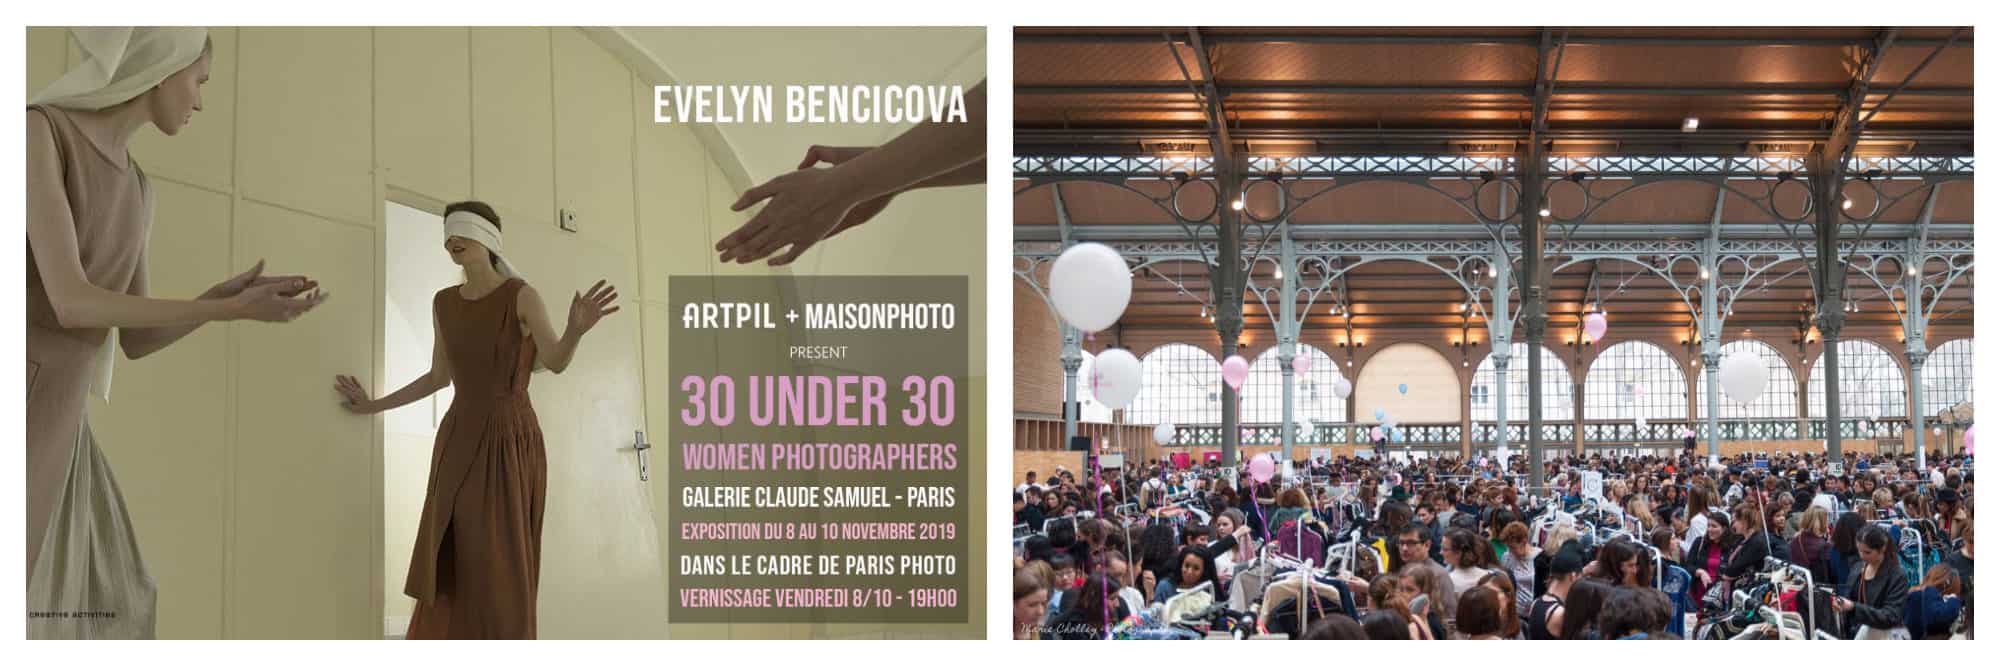 A poster for a photography event in Paris this November (left) and inside a fashion flea market at the Carreau du Temple in the Marais (right).